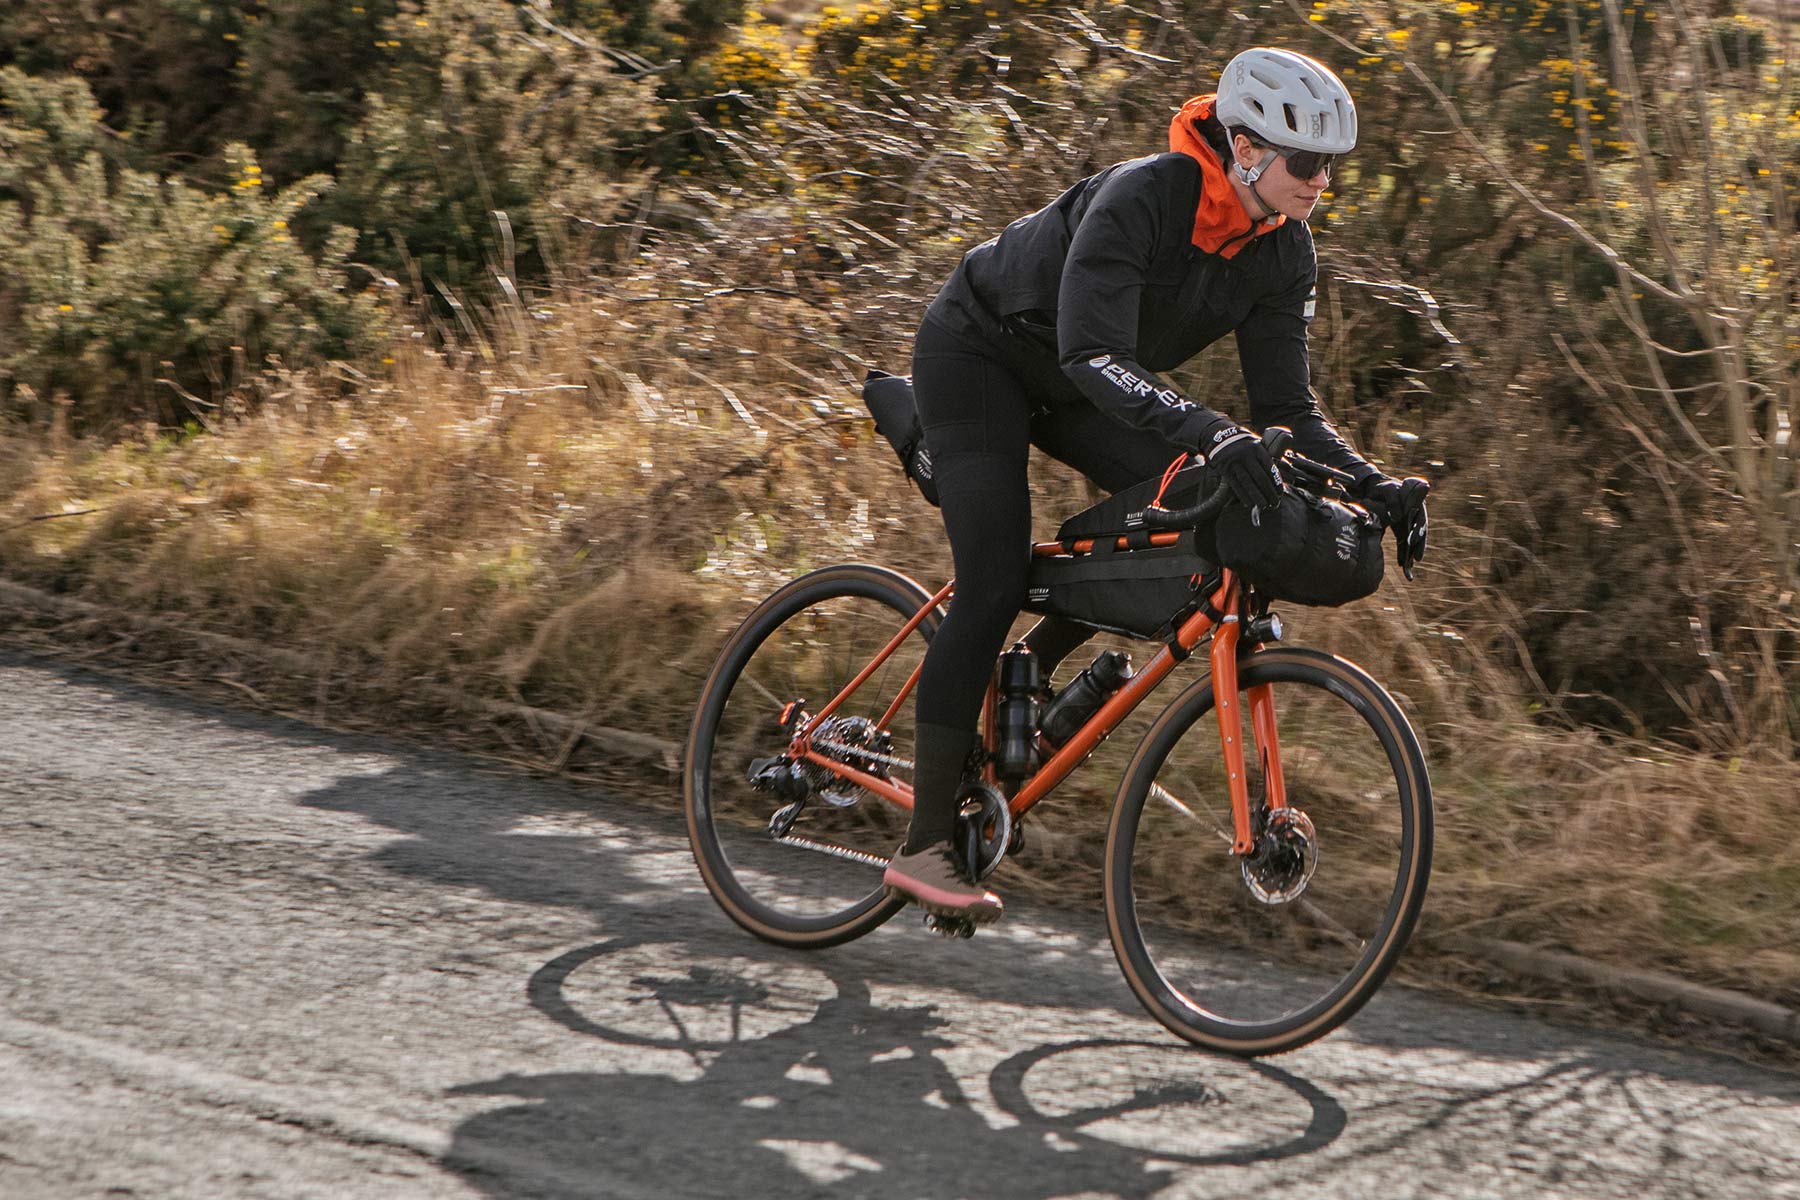 Restrap Adventure Race bikepacking bags, fast road touring